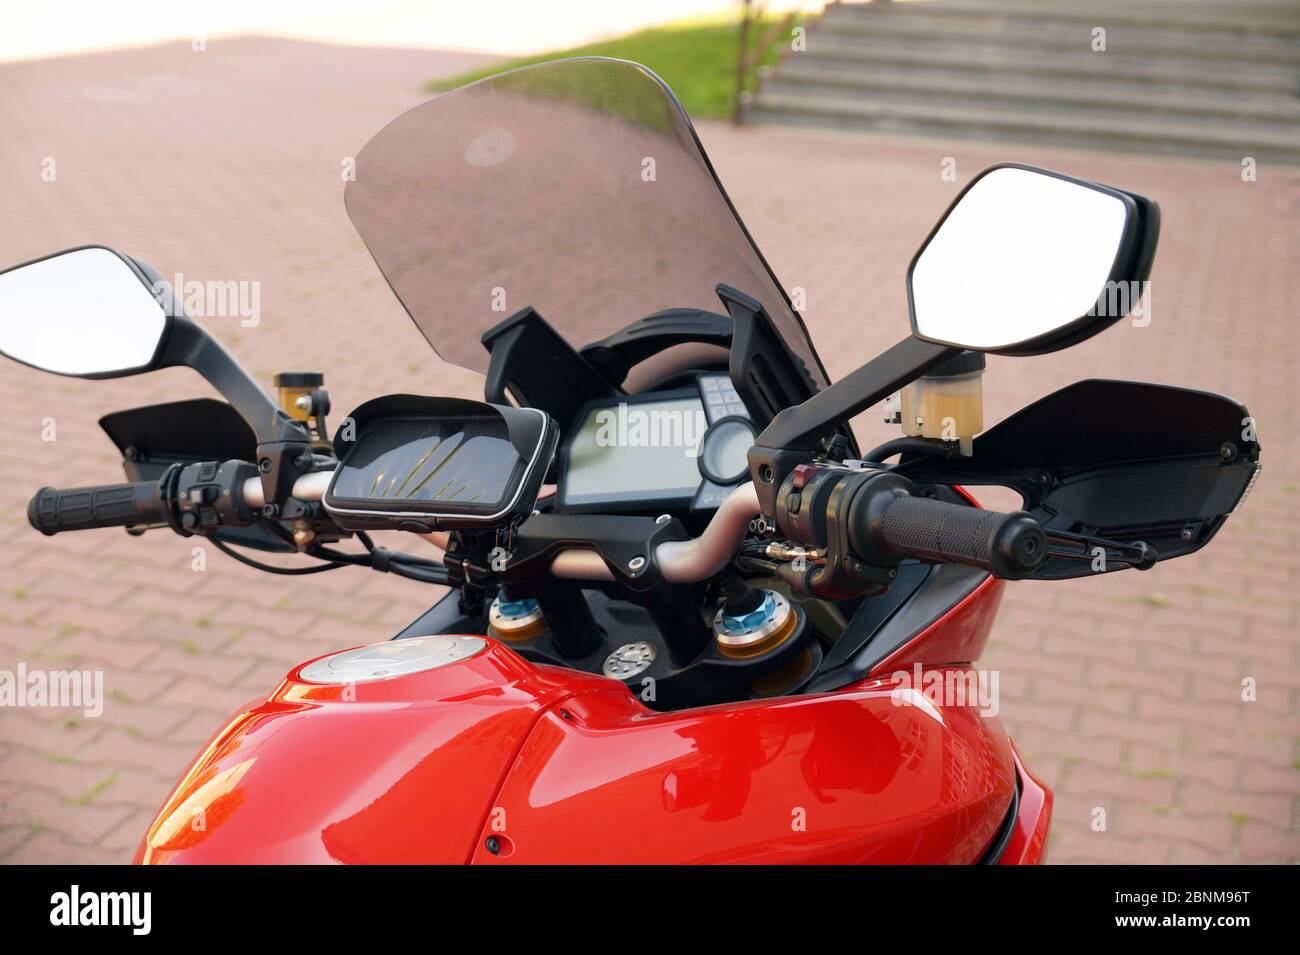 Before the trip. Motorcycle steering wheel with fairing and a case for a mobile phone. Stock Photo